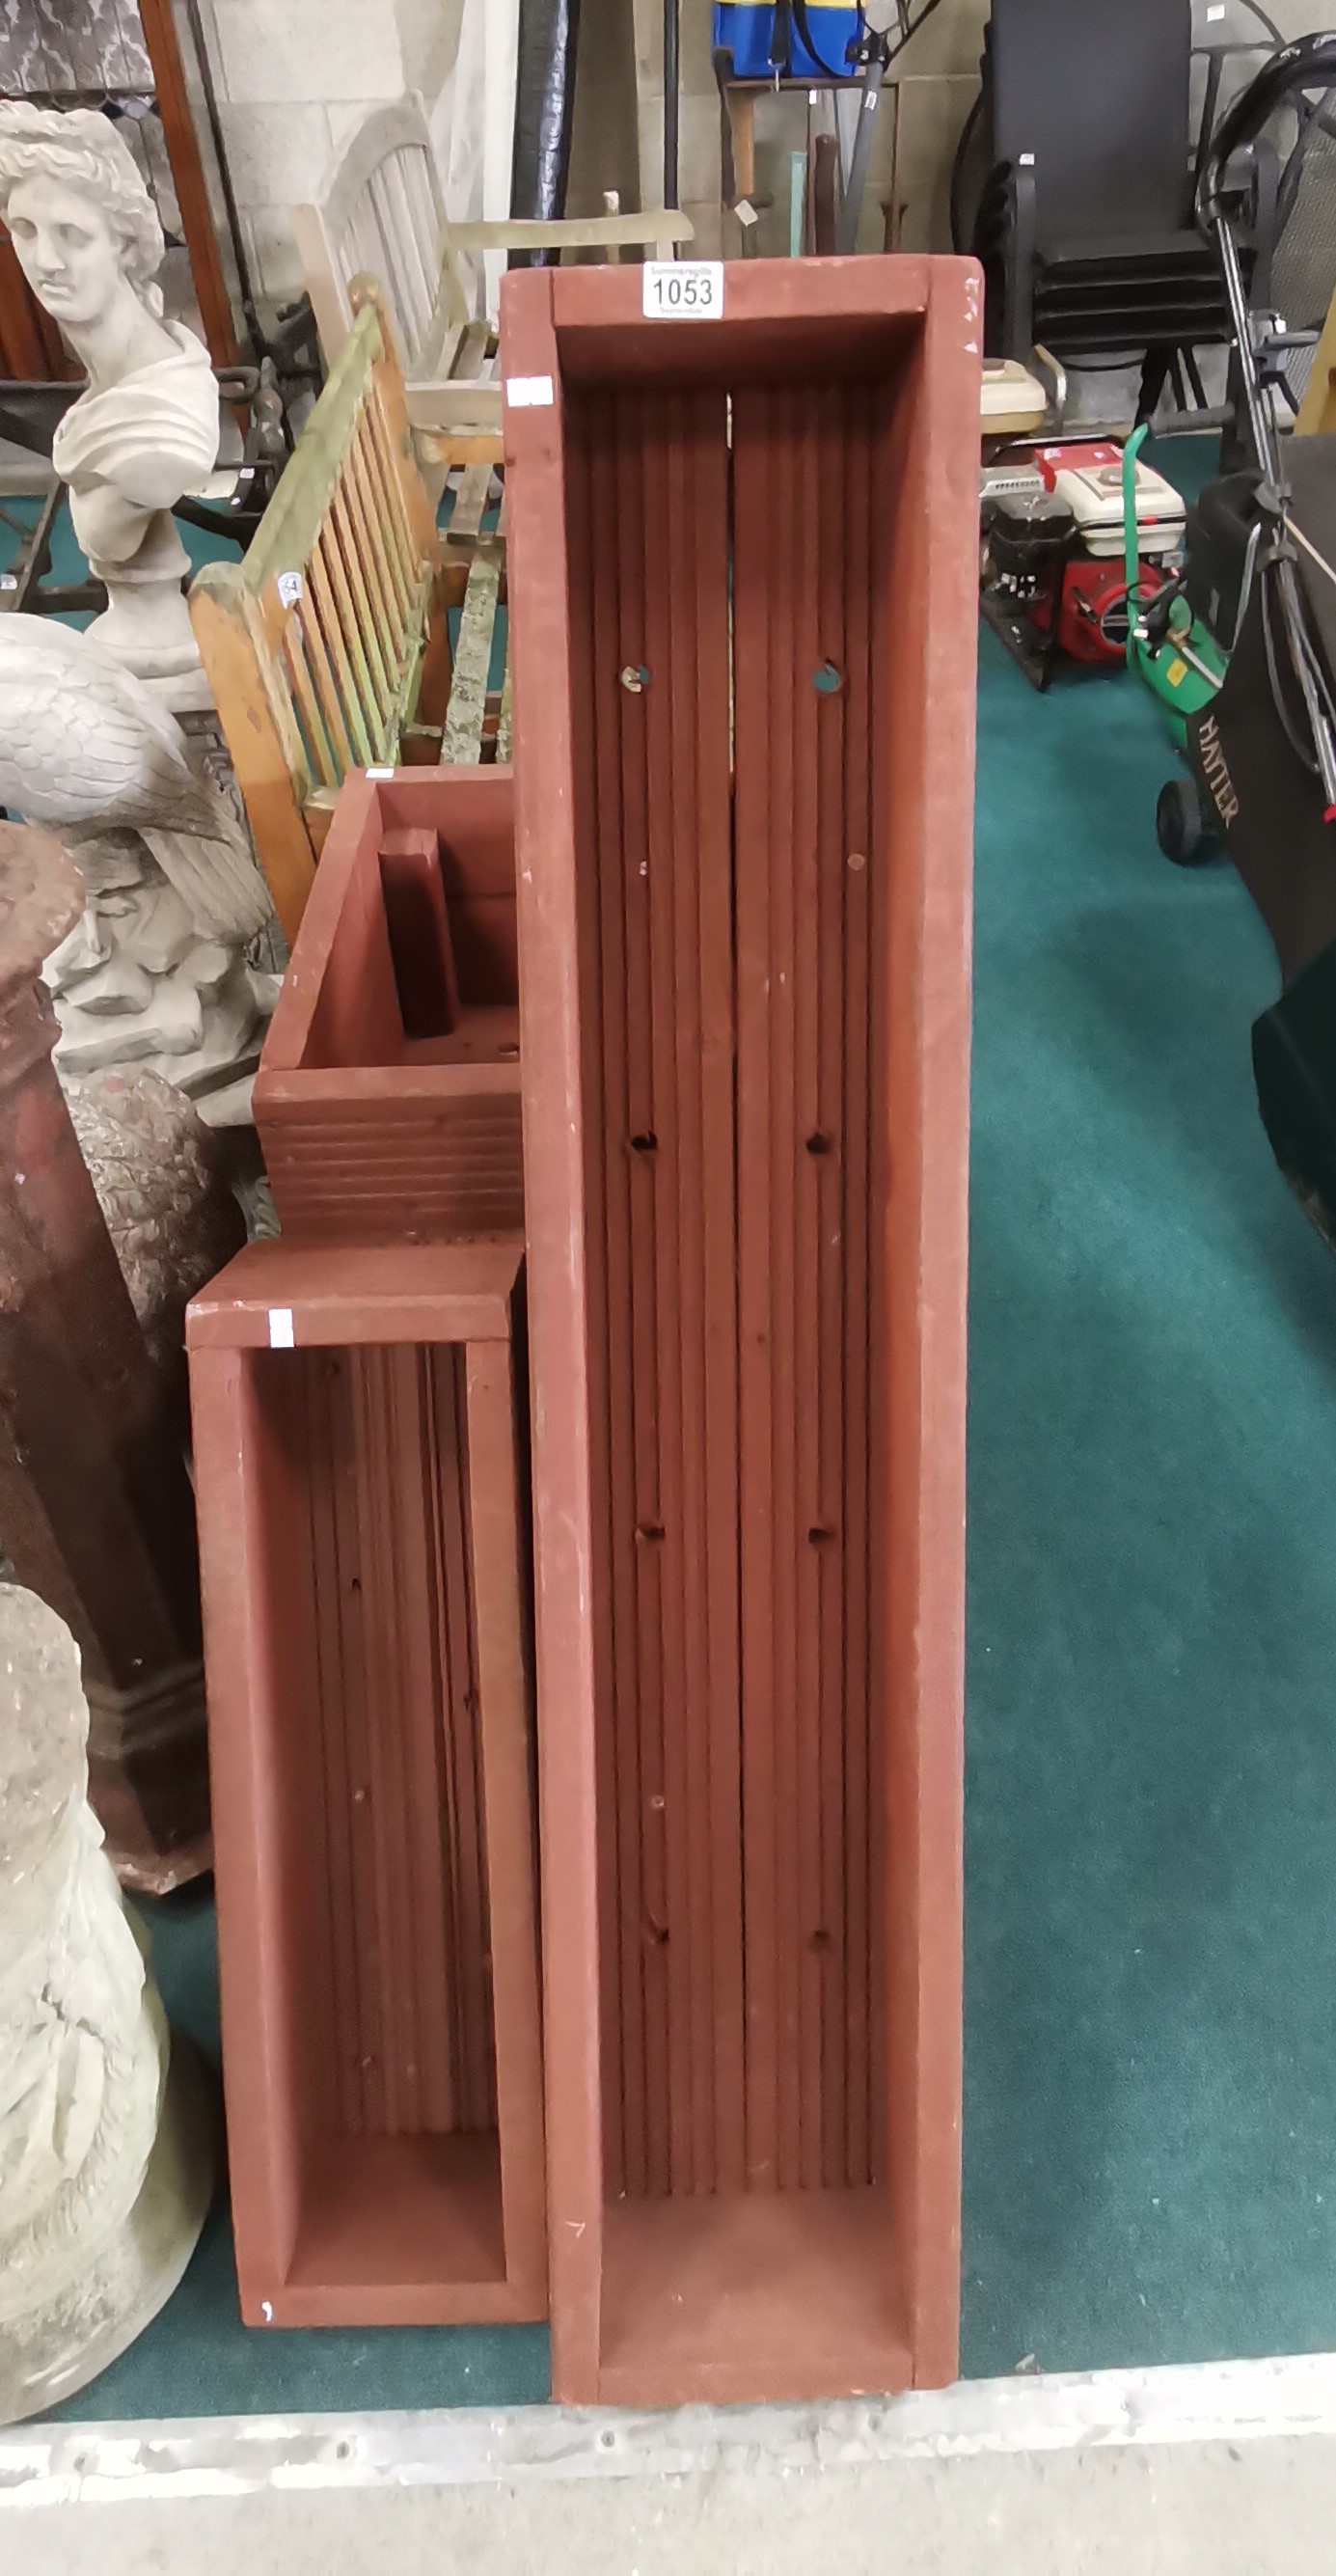 x4 wooden planters